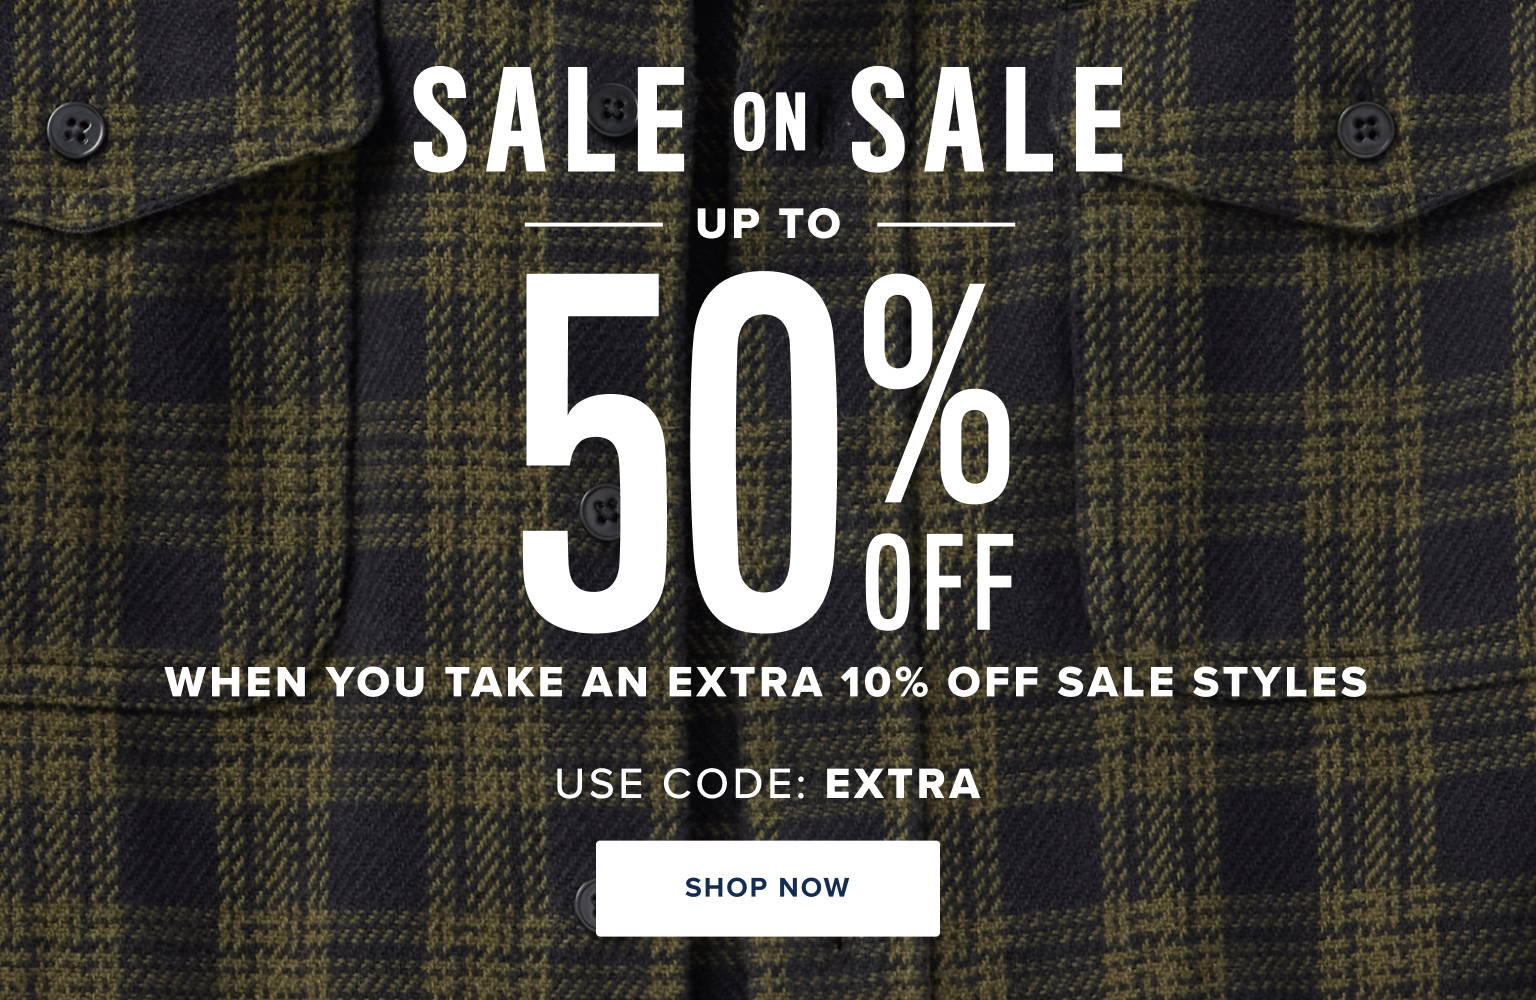 Sale on sale. Up to 50% off when you take an extra 10% off Sale Styles